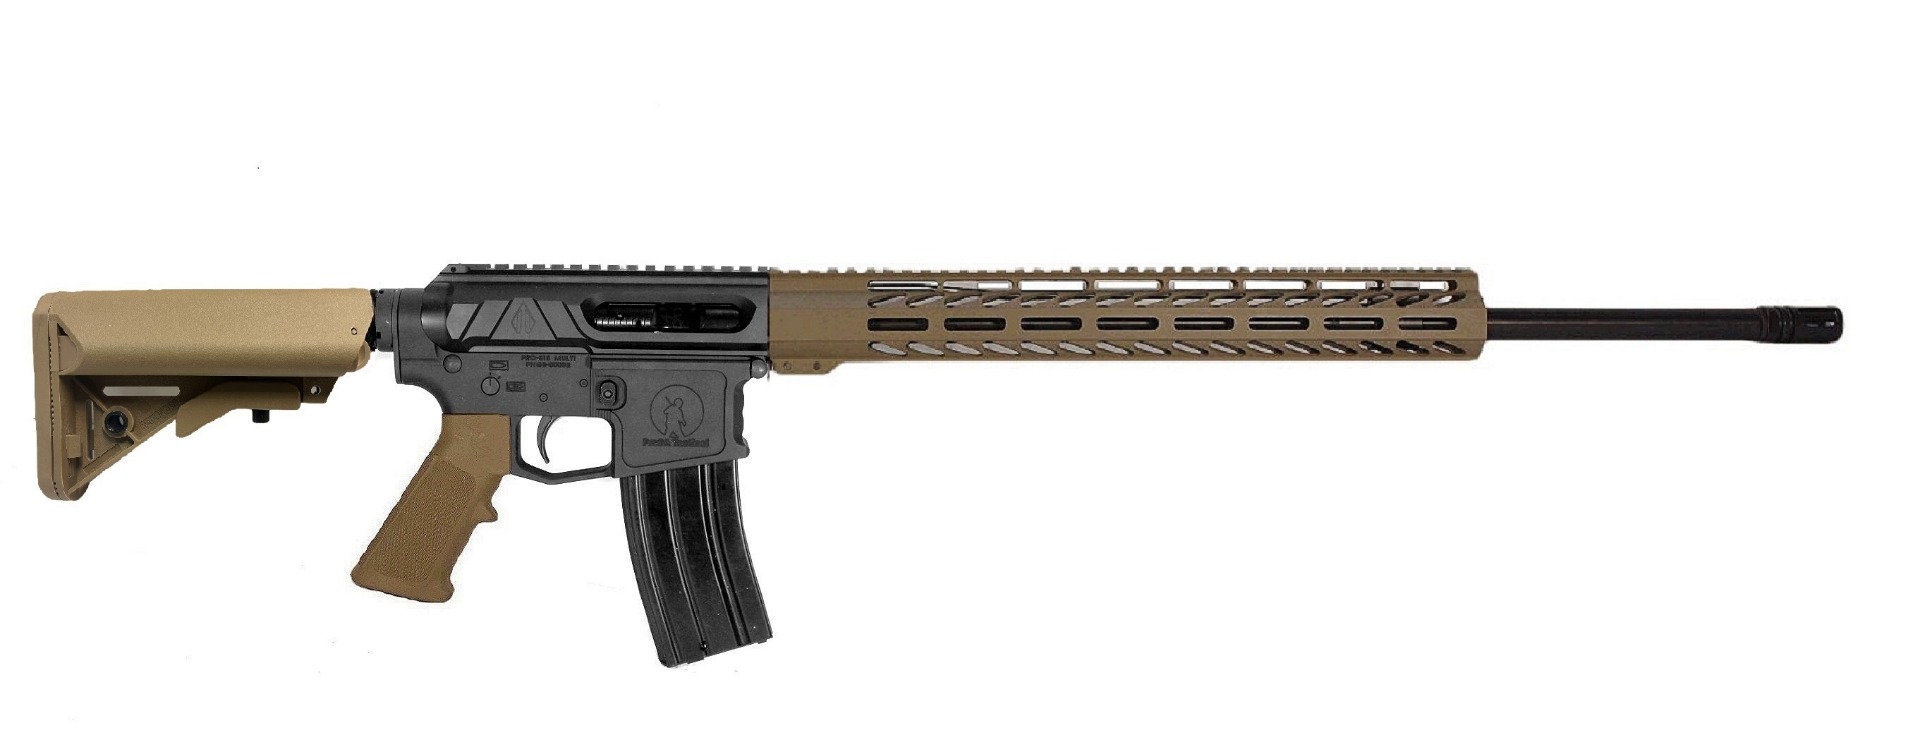 22 inch 224 Valkyrie Complete AR15 Rifle